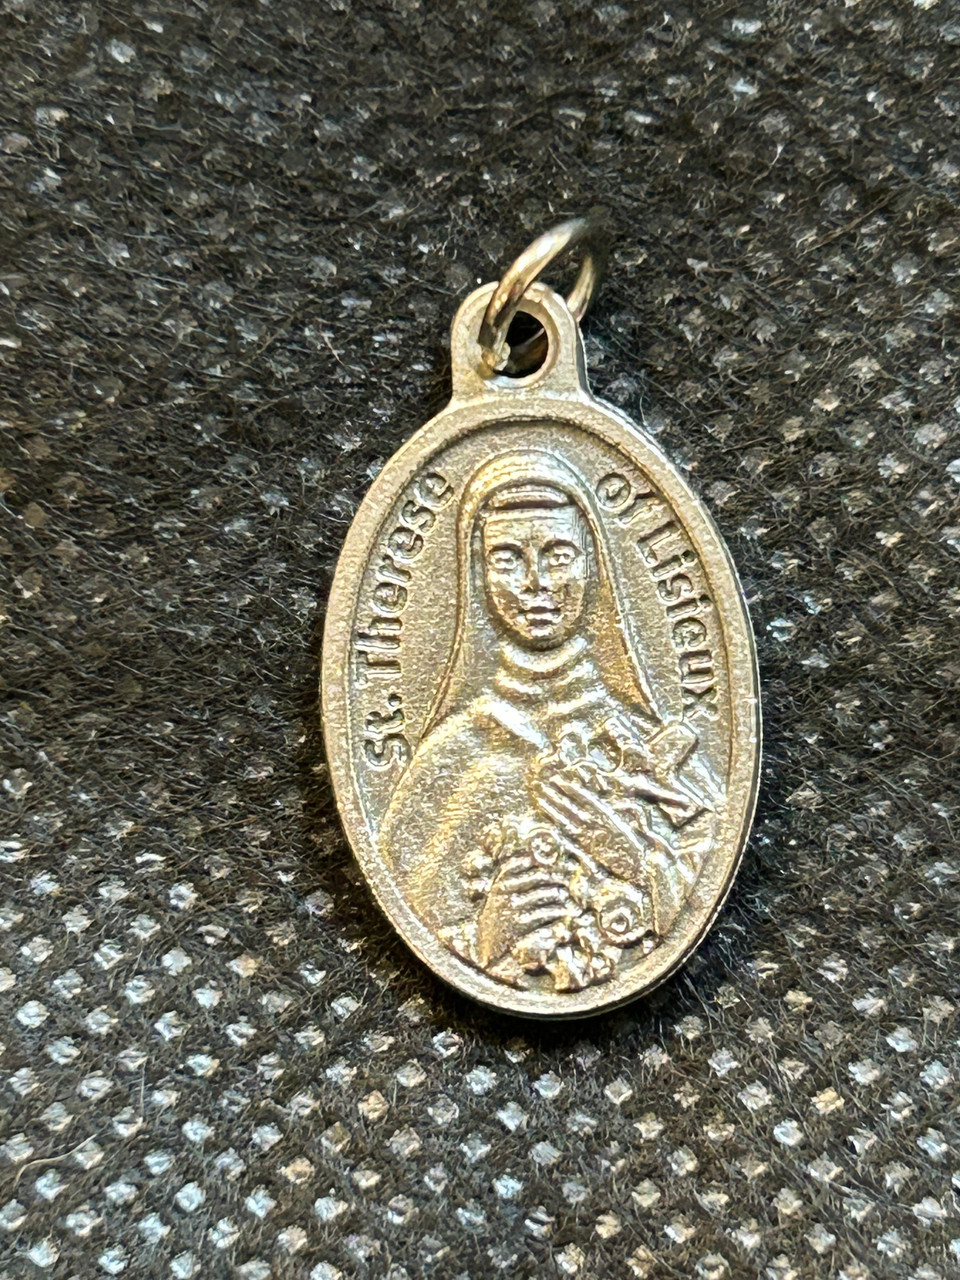 Saint Therese of Lisieux third class relic medal